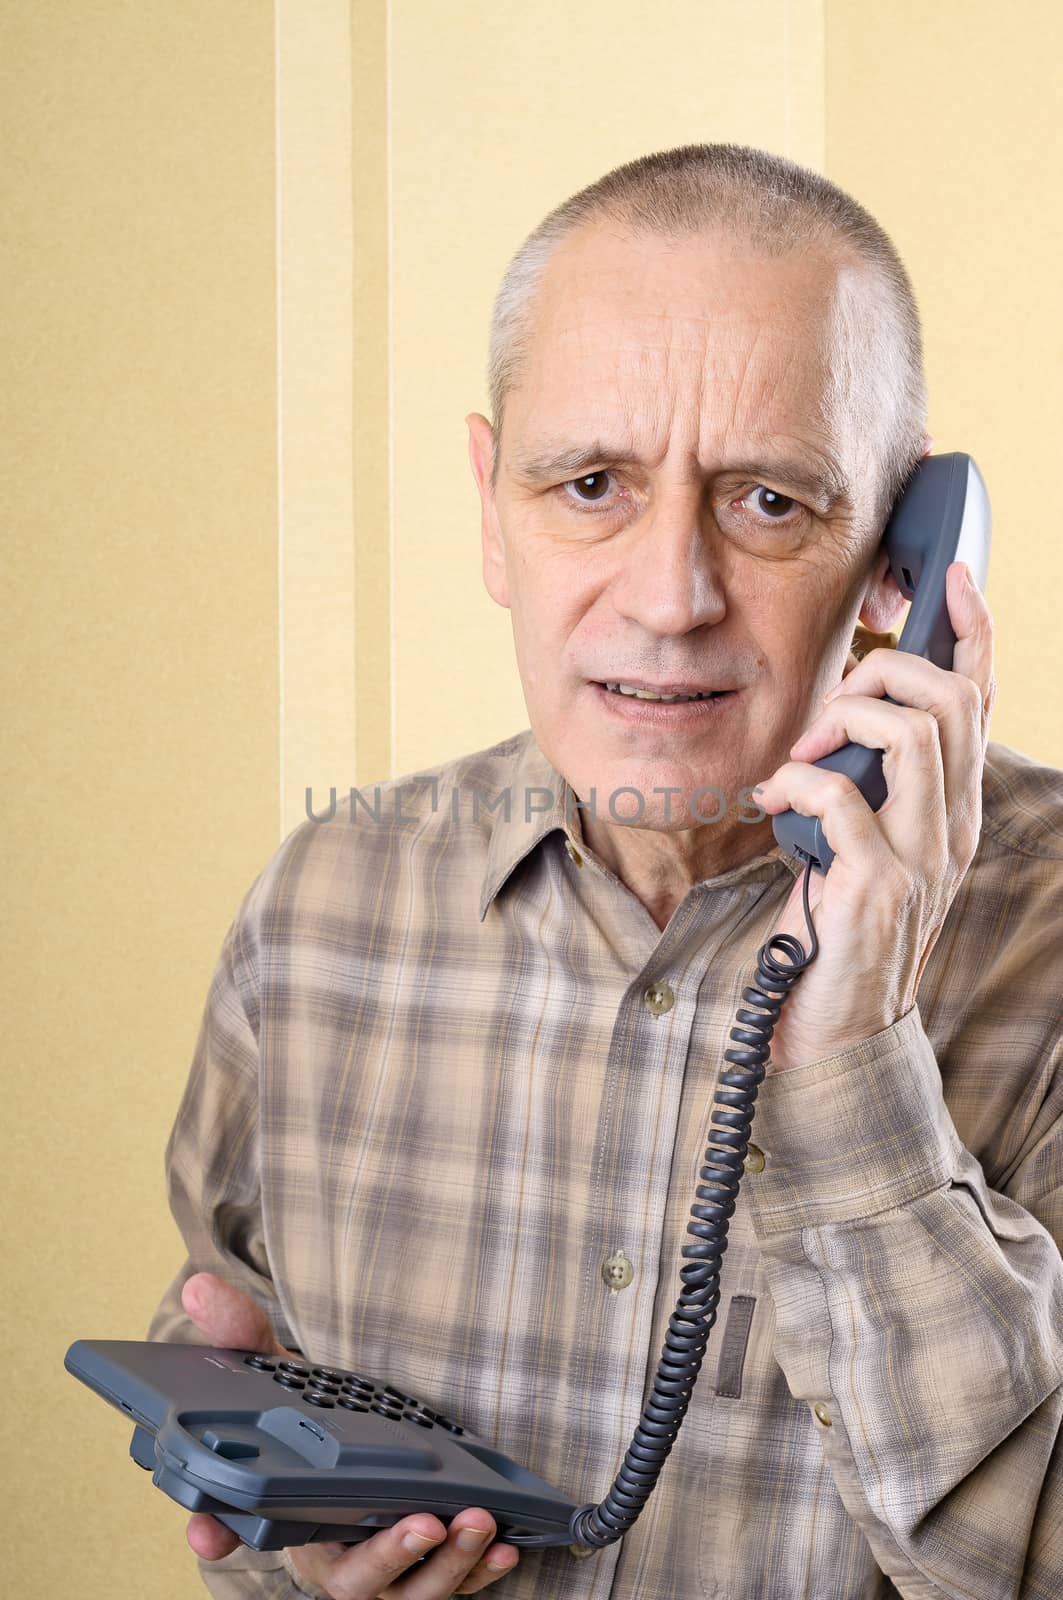 Upset man having bad news and holding a phone in hand